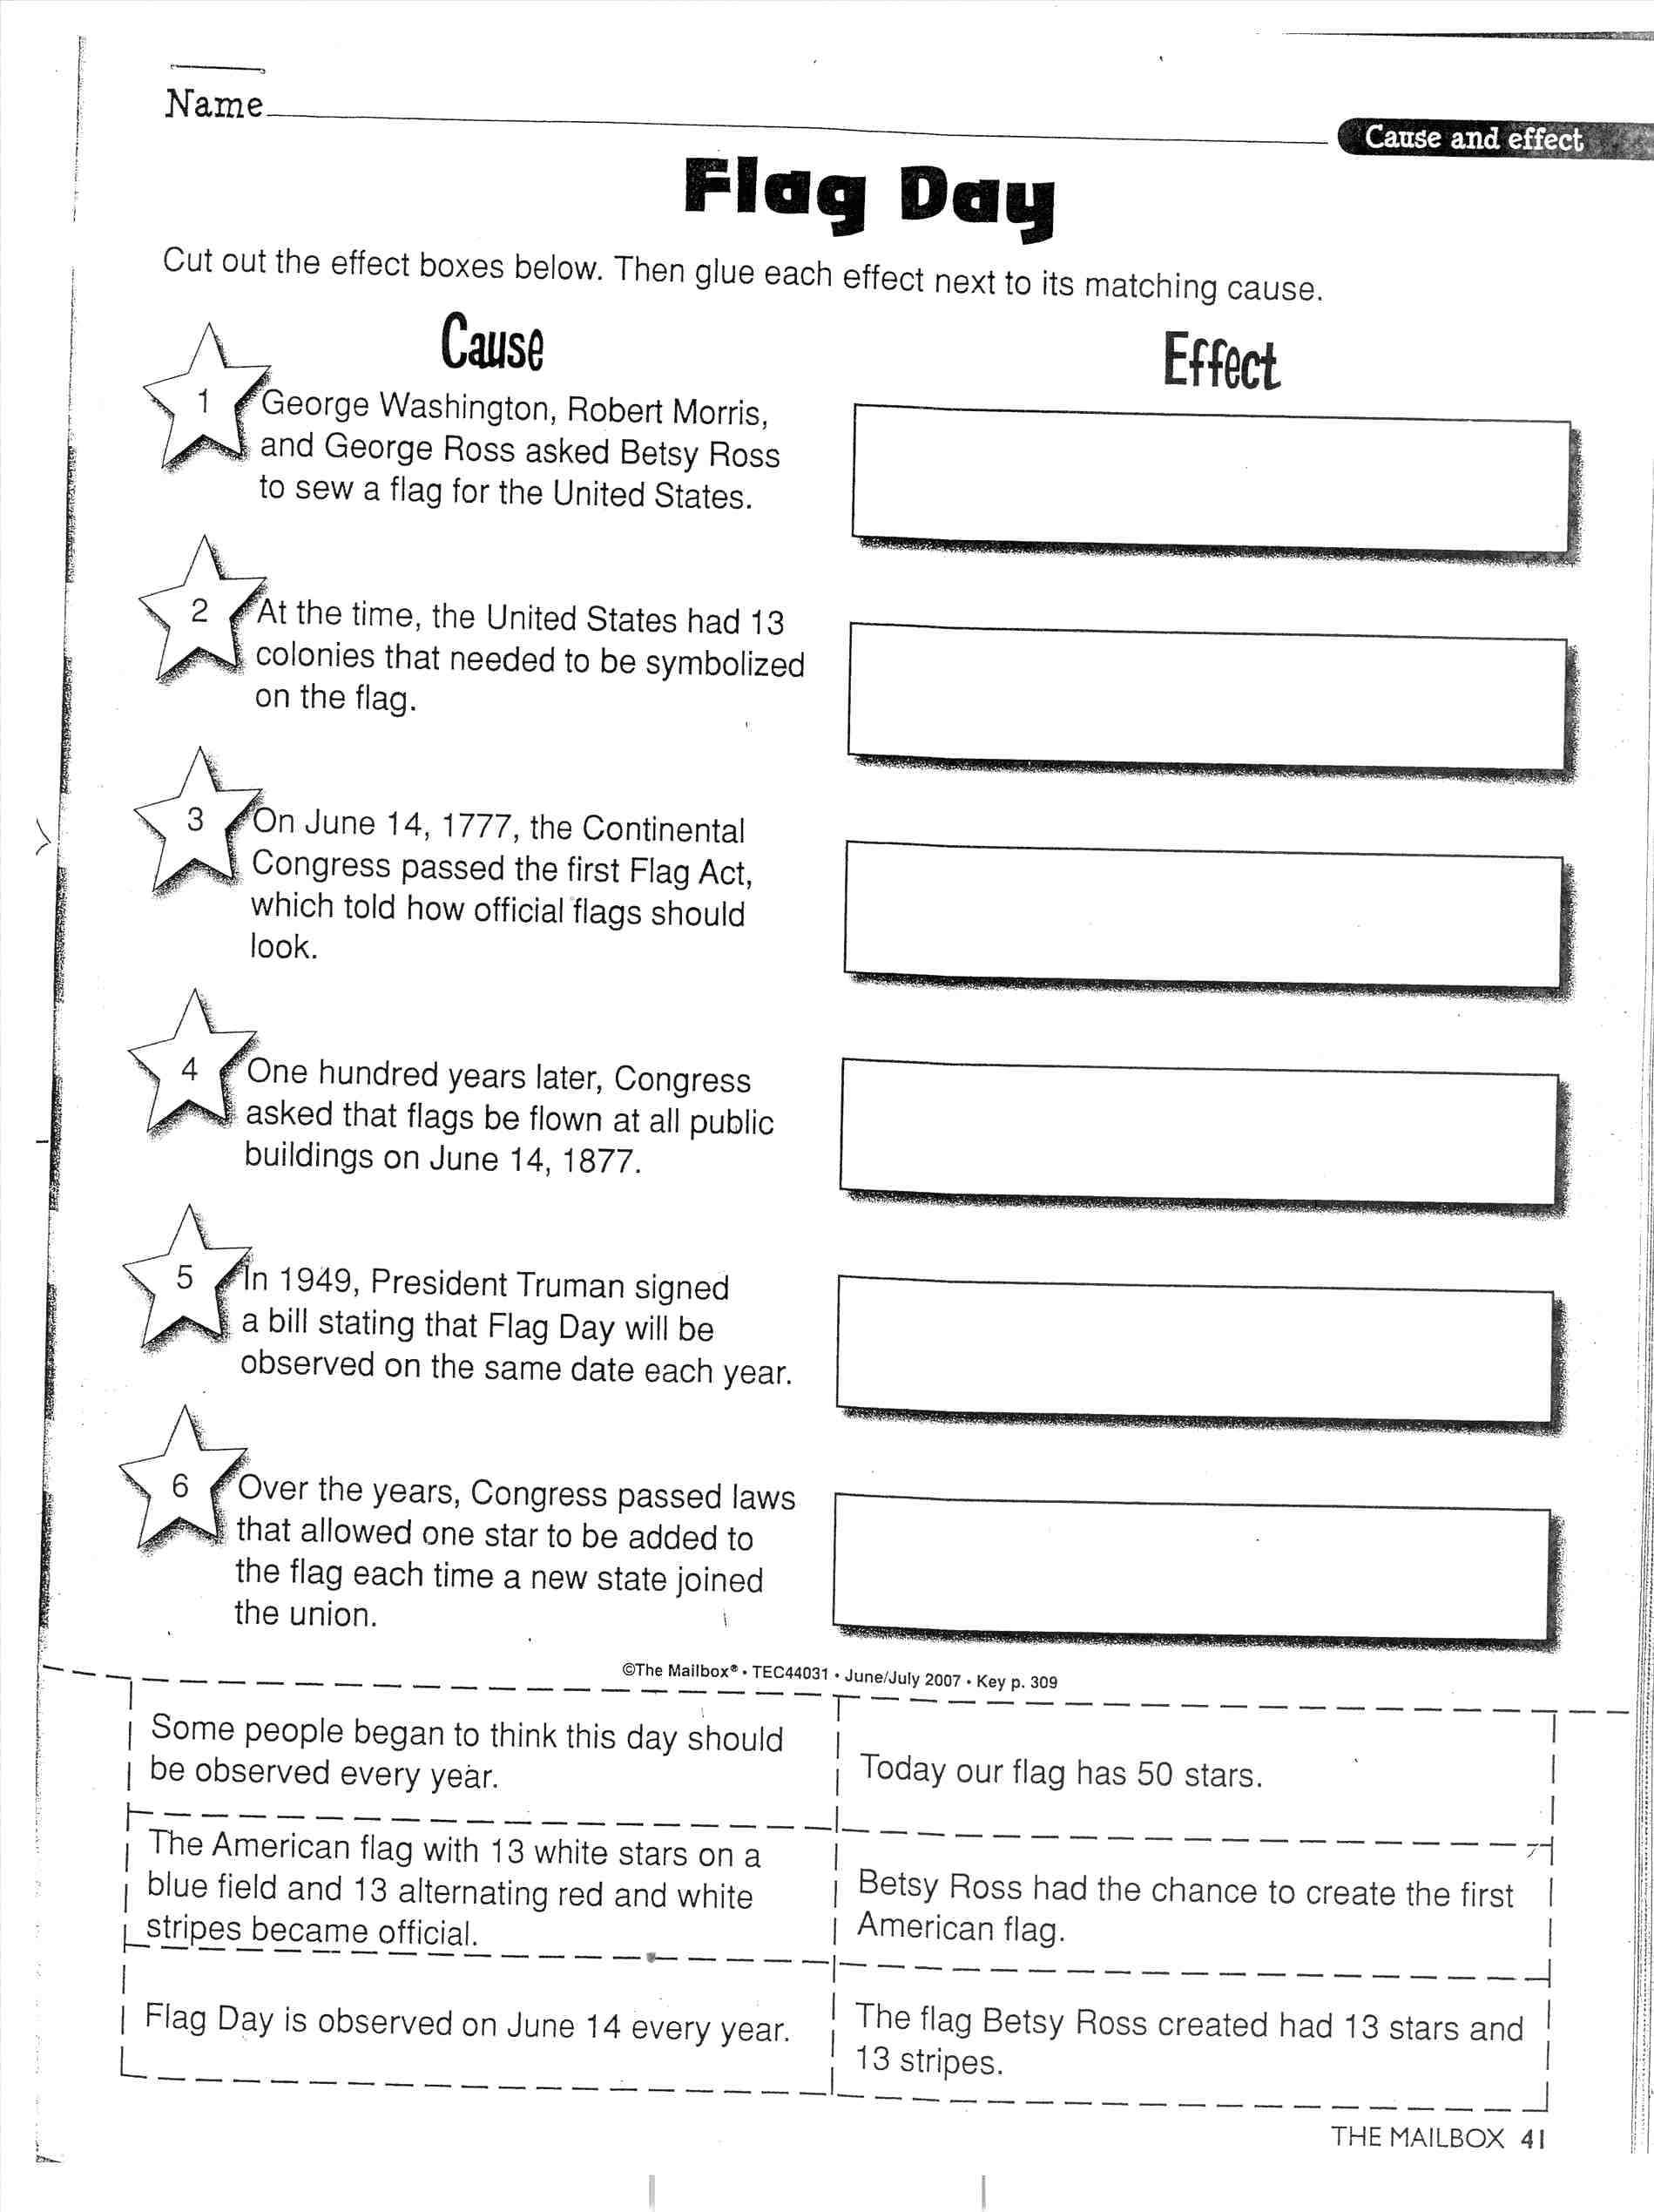 Scale Drawings Worksheet 7th Grade as Well as Drawing Worksheets High School the Best Worksheets Image Collection